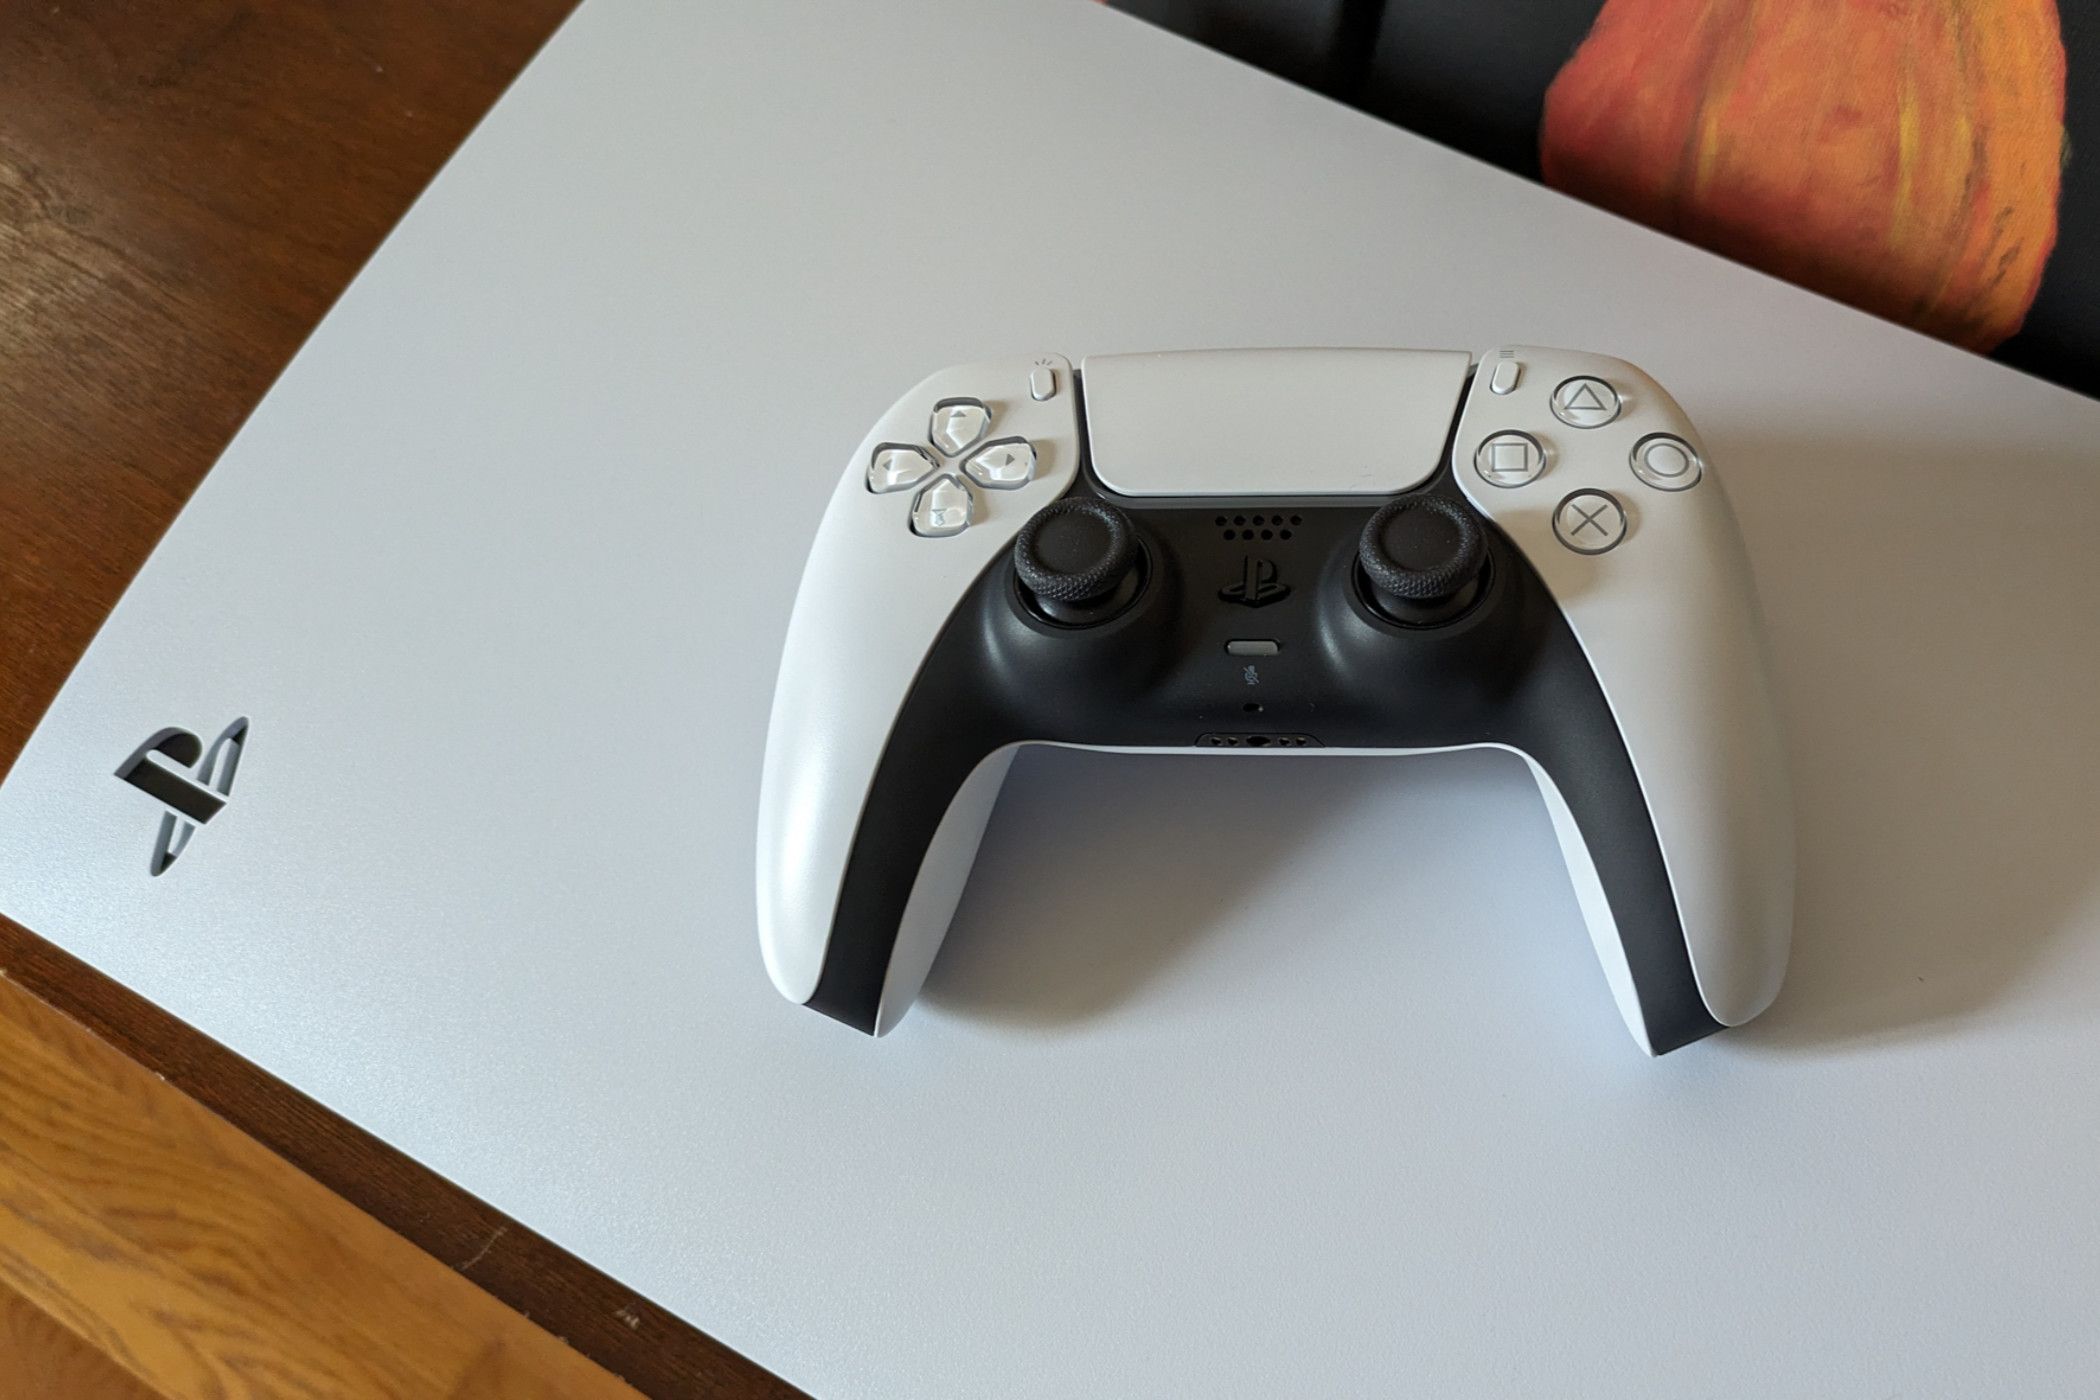 Sony PlayStation 5 DualSense controller on top of a console.